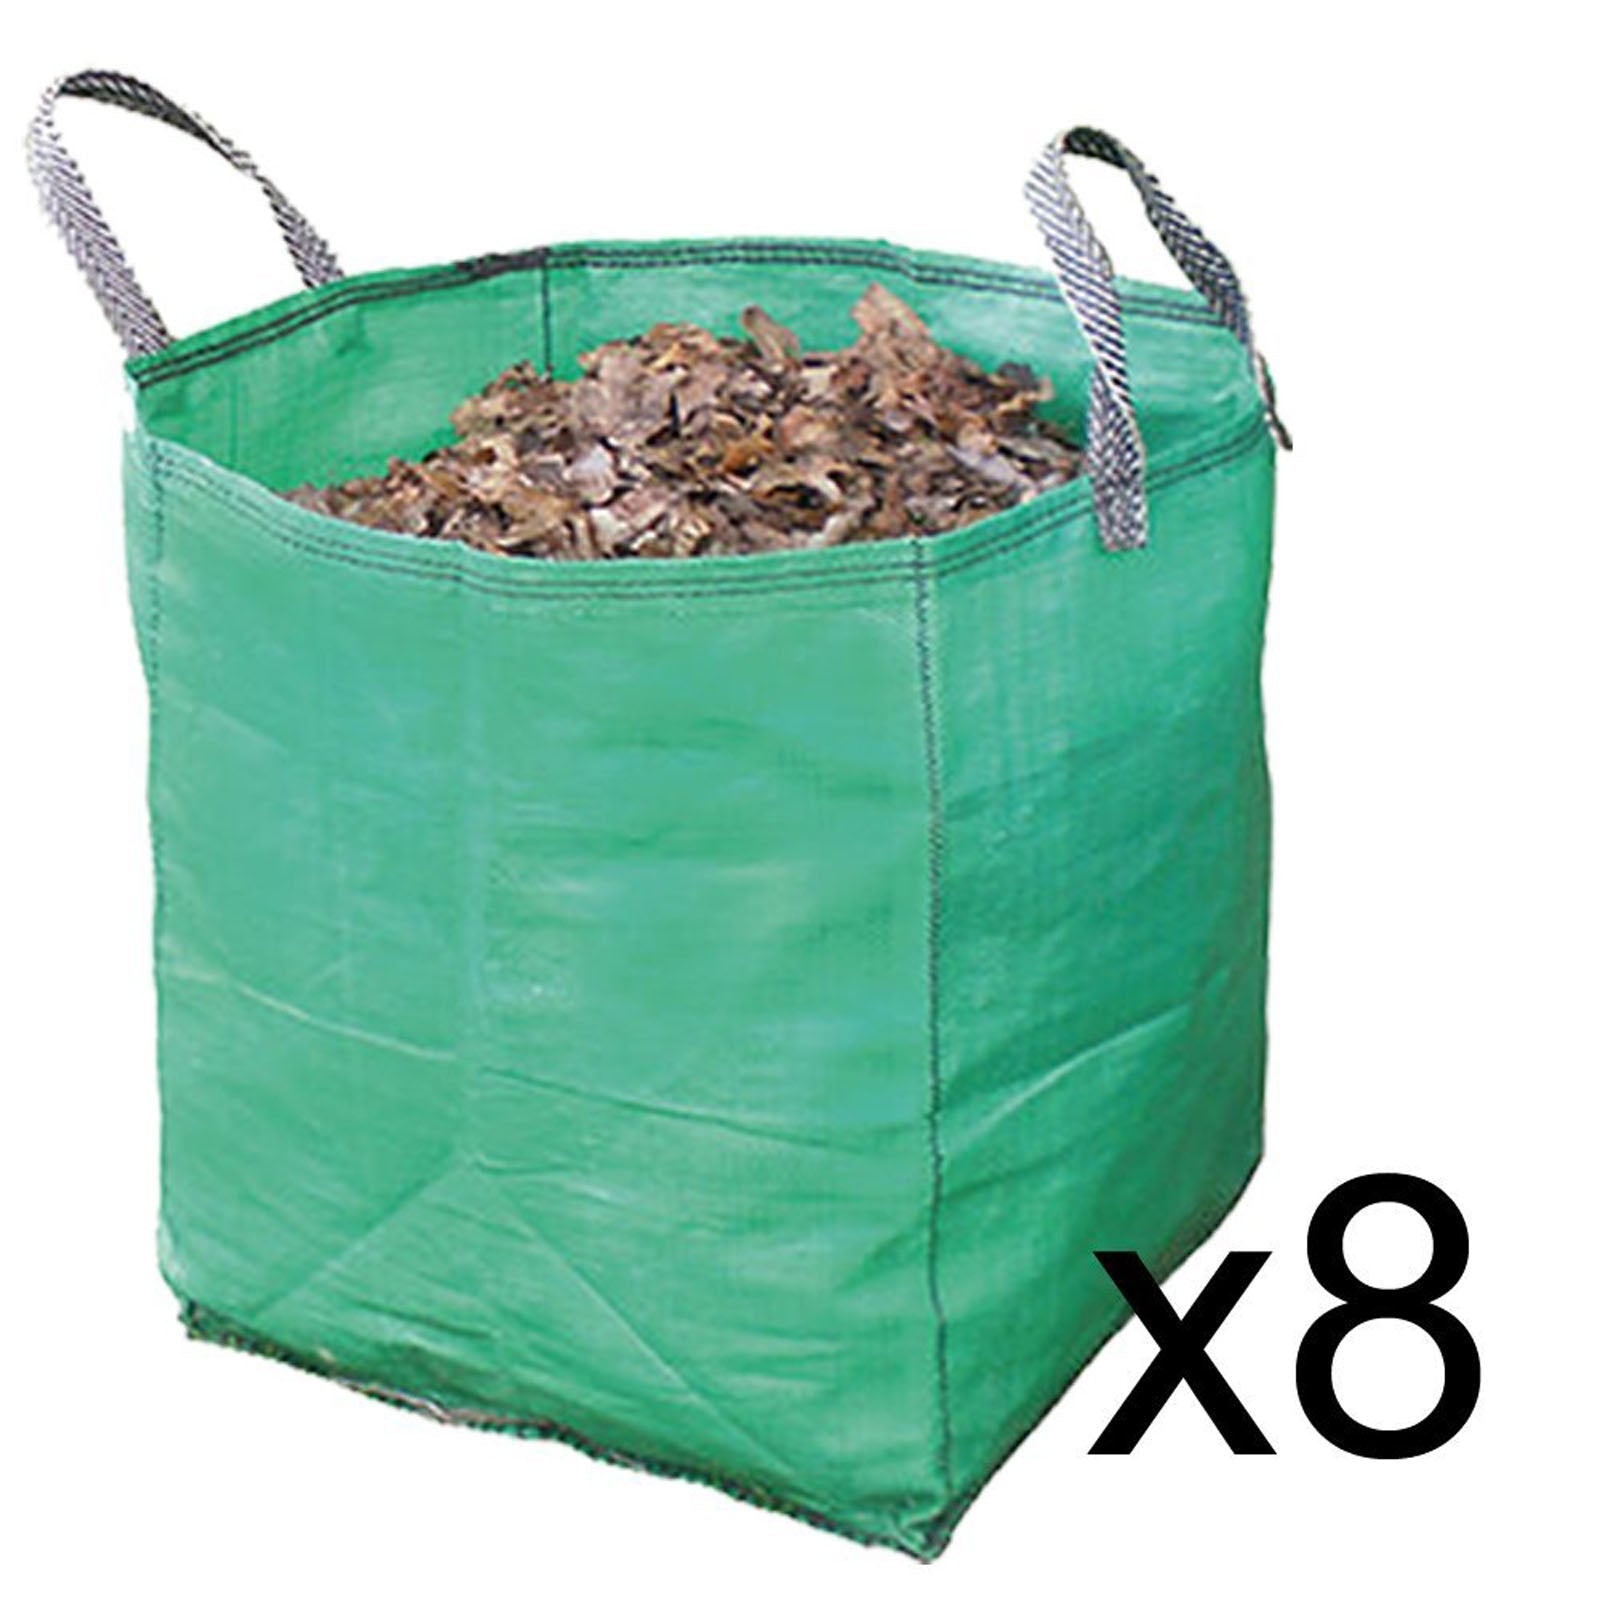 Large Garden Waste Recycling Tip Bags Heavy Duty Non Tear Woven Plastic Sack x 8